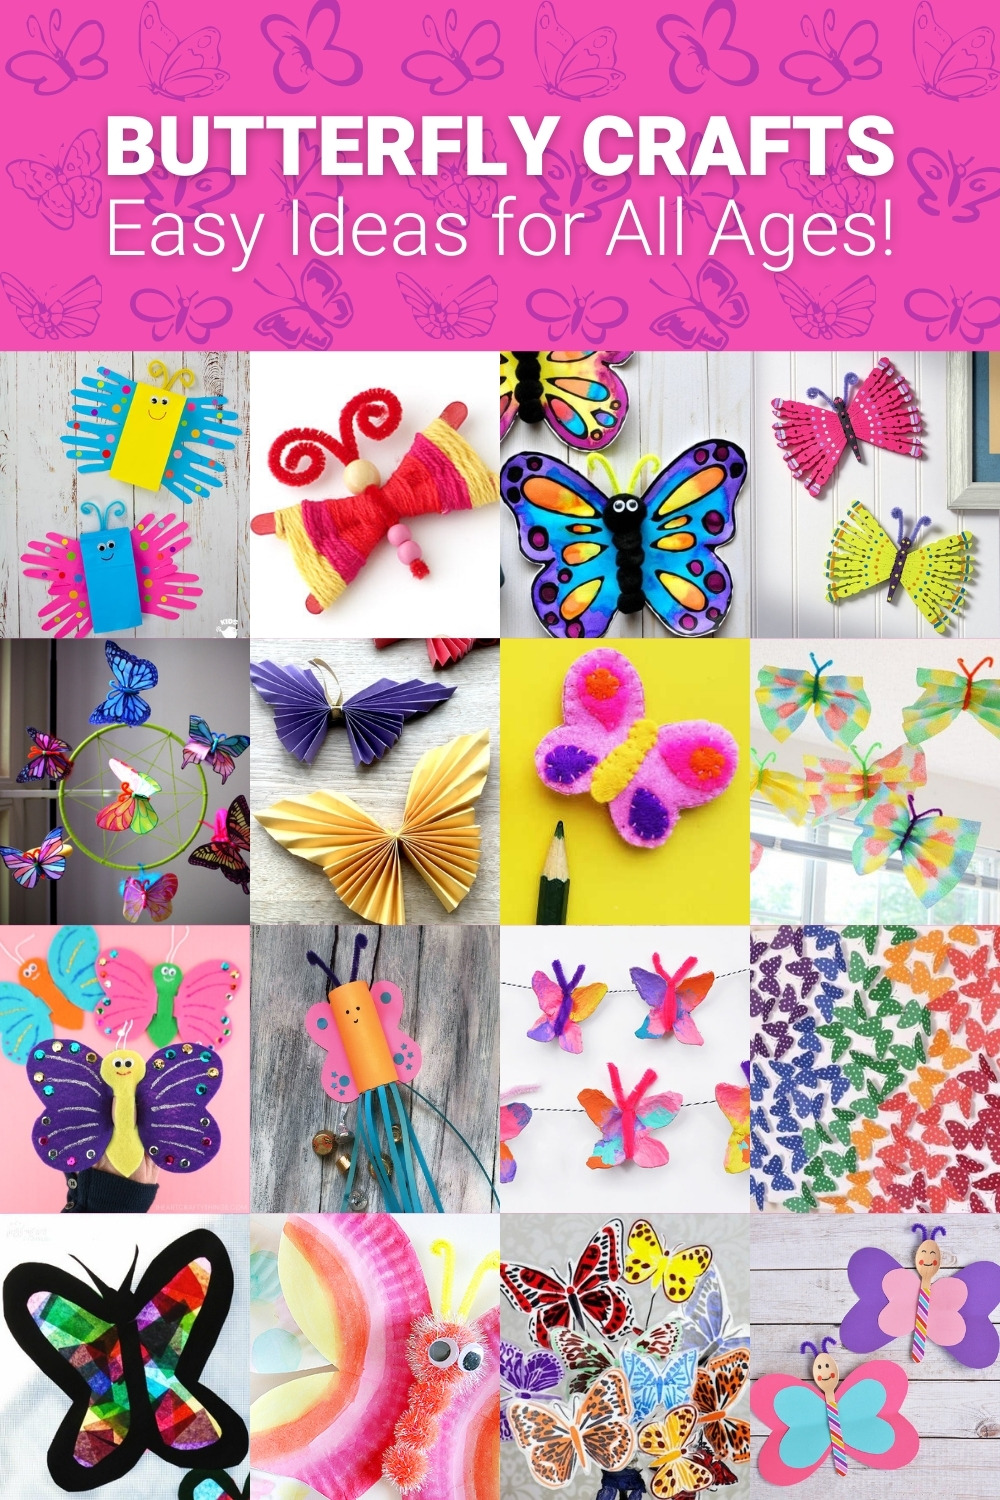 https://diycandy.b-cdn.net/wp-content/uploads/2022/06/Easy-butterfly-crafts-for-kids-of-all-ages.jpg